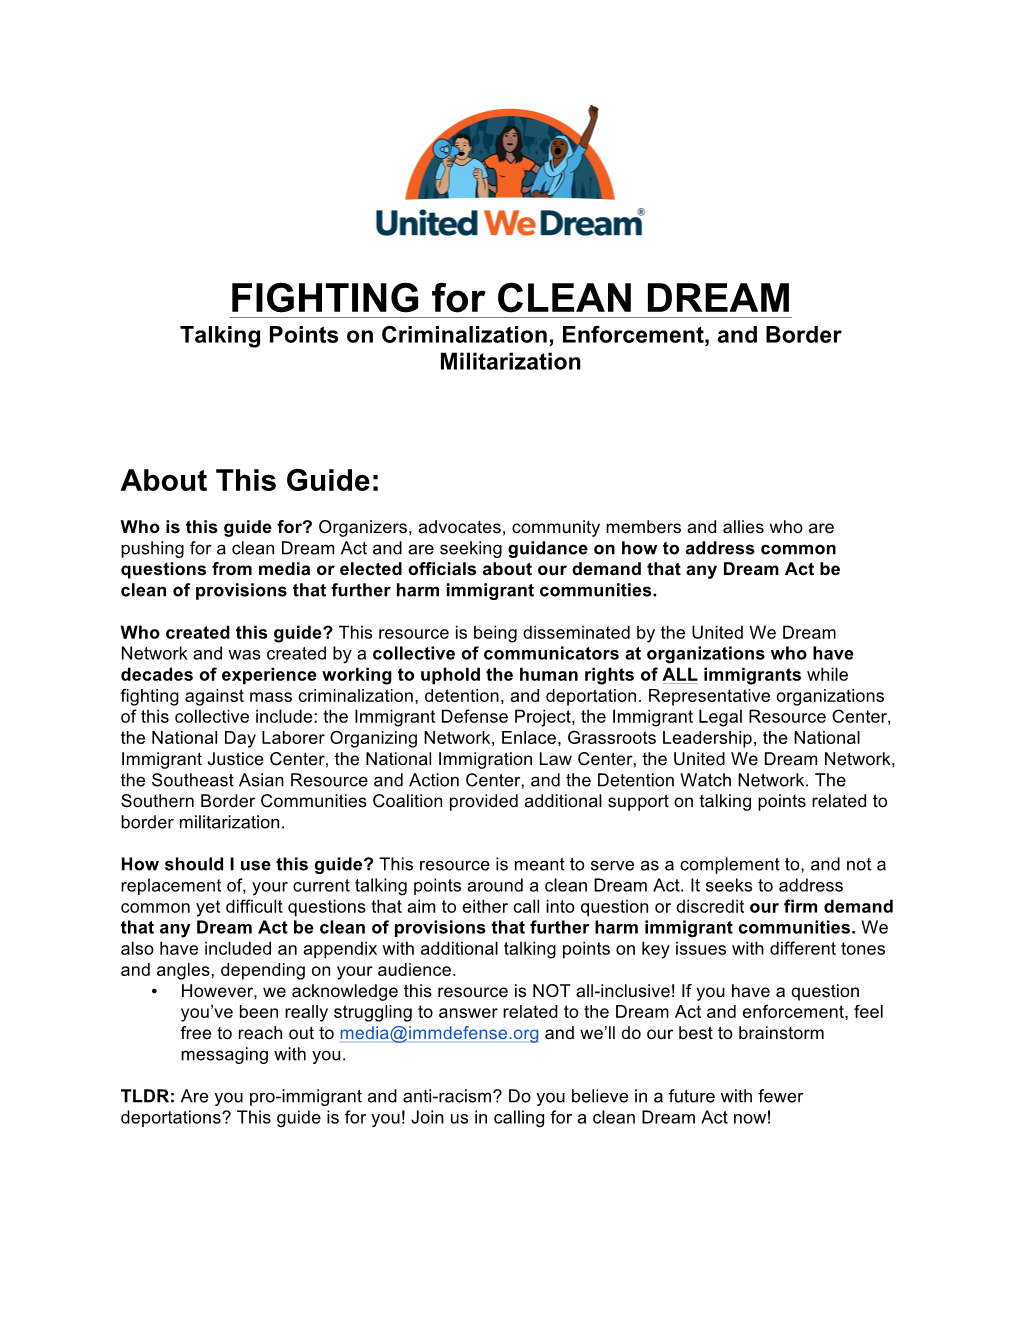 FIGHTING for CLEAN DREAM: Talking Points on Criminalization, Enforcement, and Border Militarization